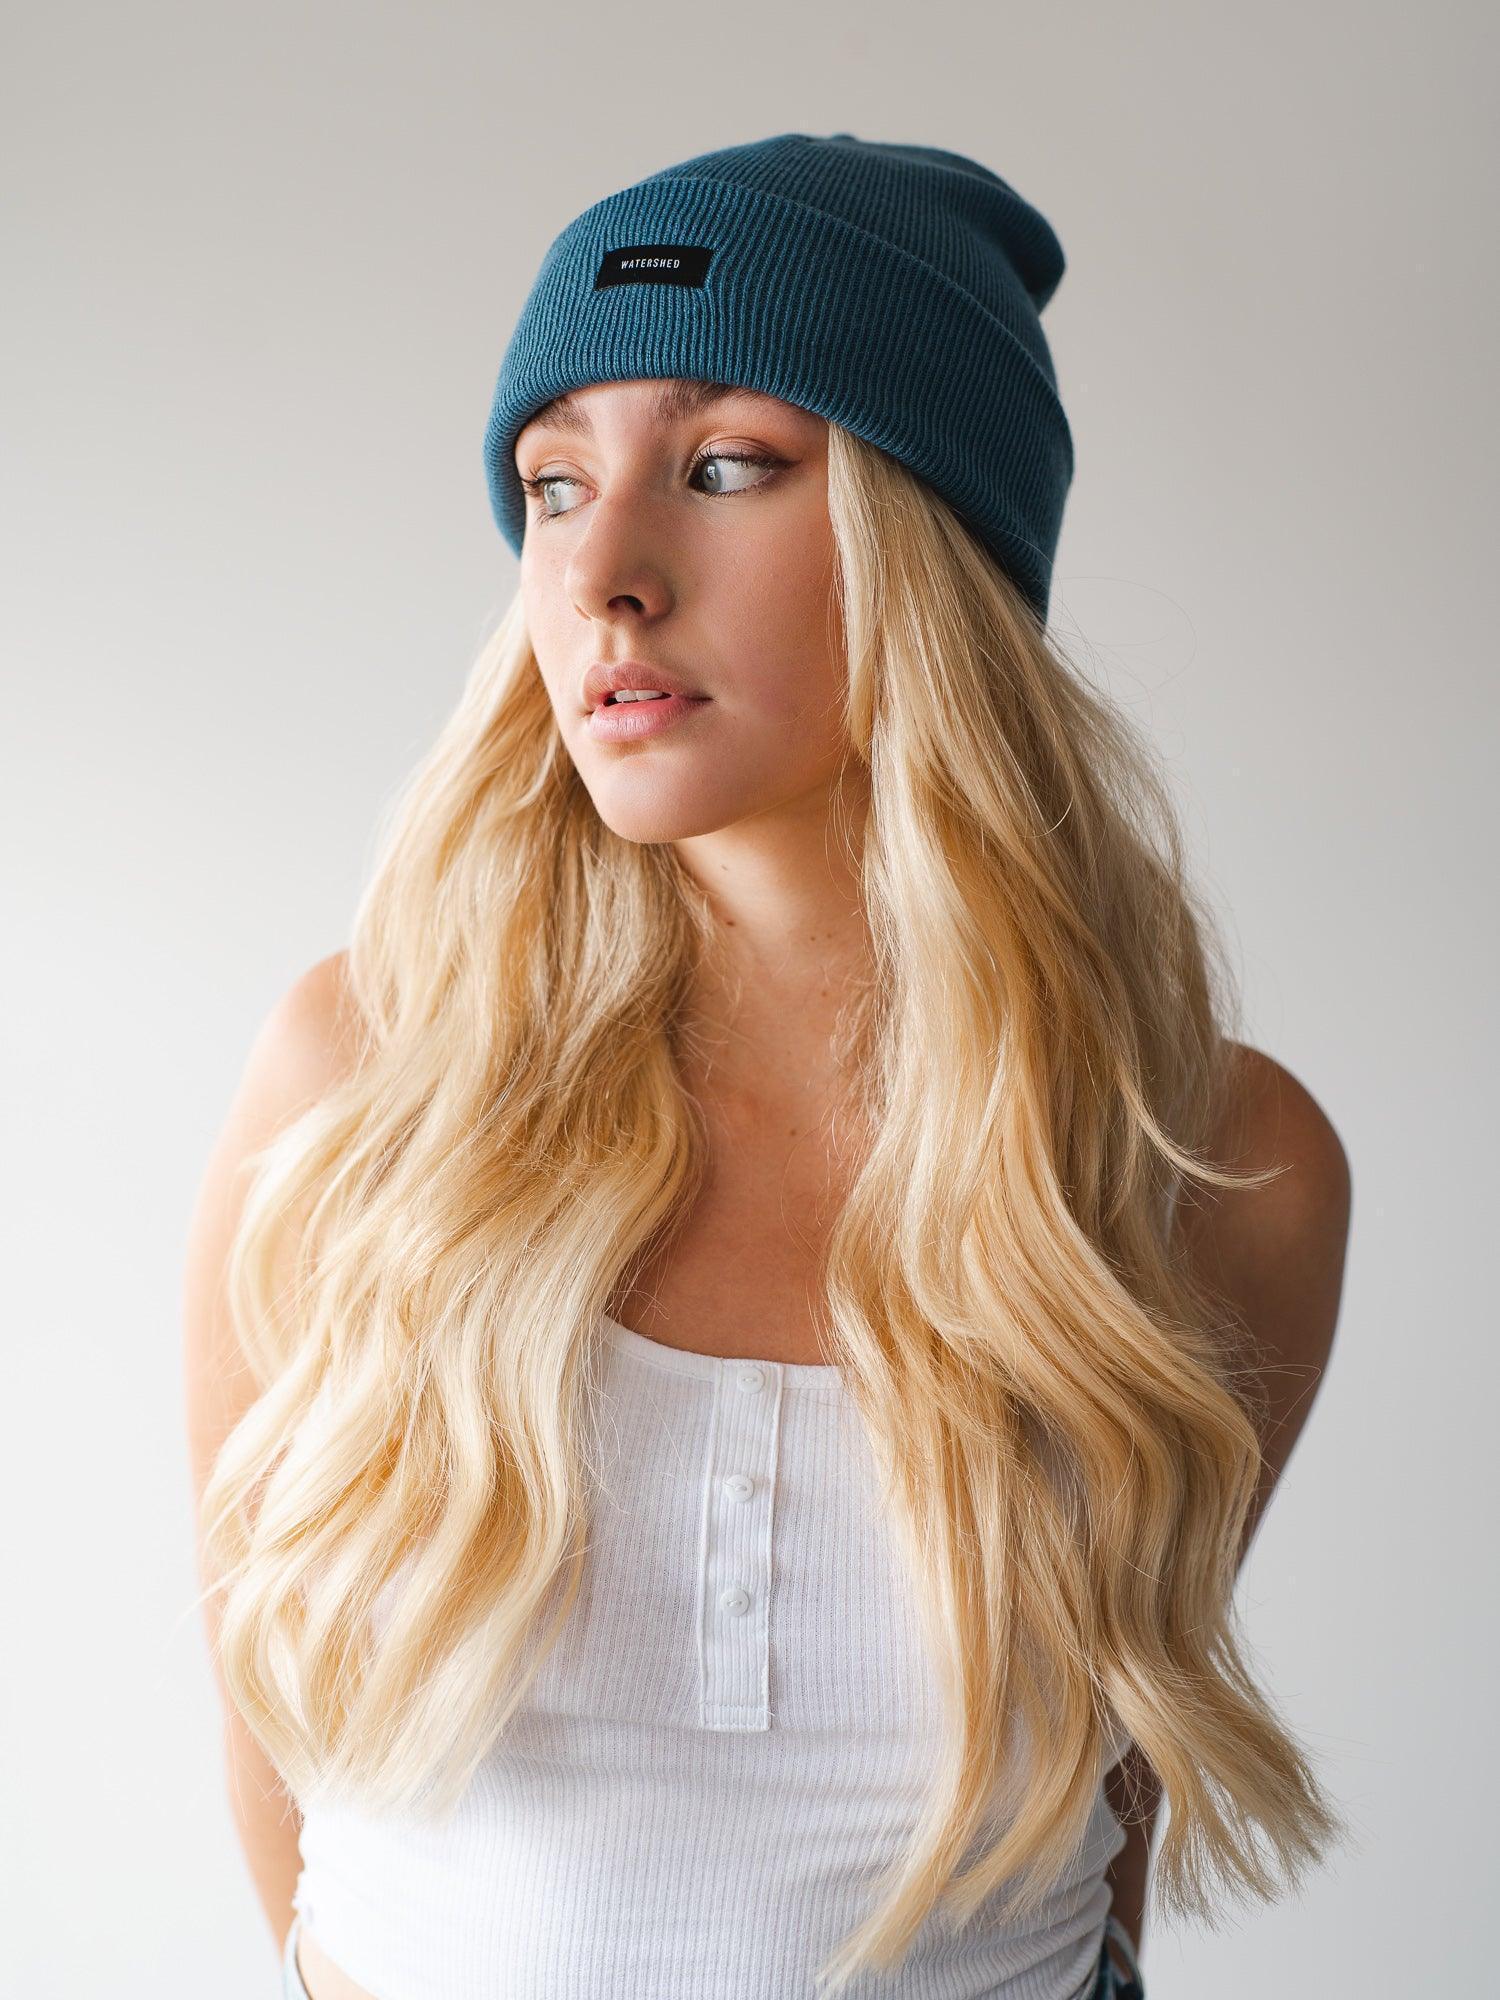 Teal Beanie - Stay cozy and chic with this trendy teal beanie, a stylish accessory to keep you warm and fashionable during the colder days.